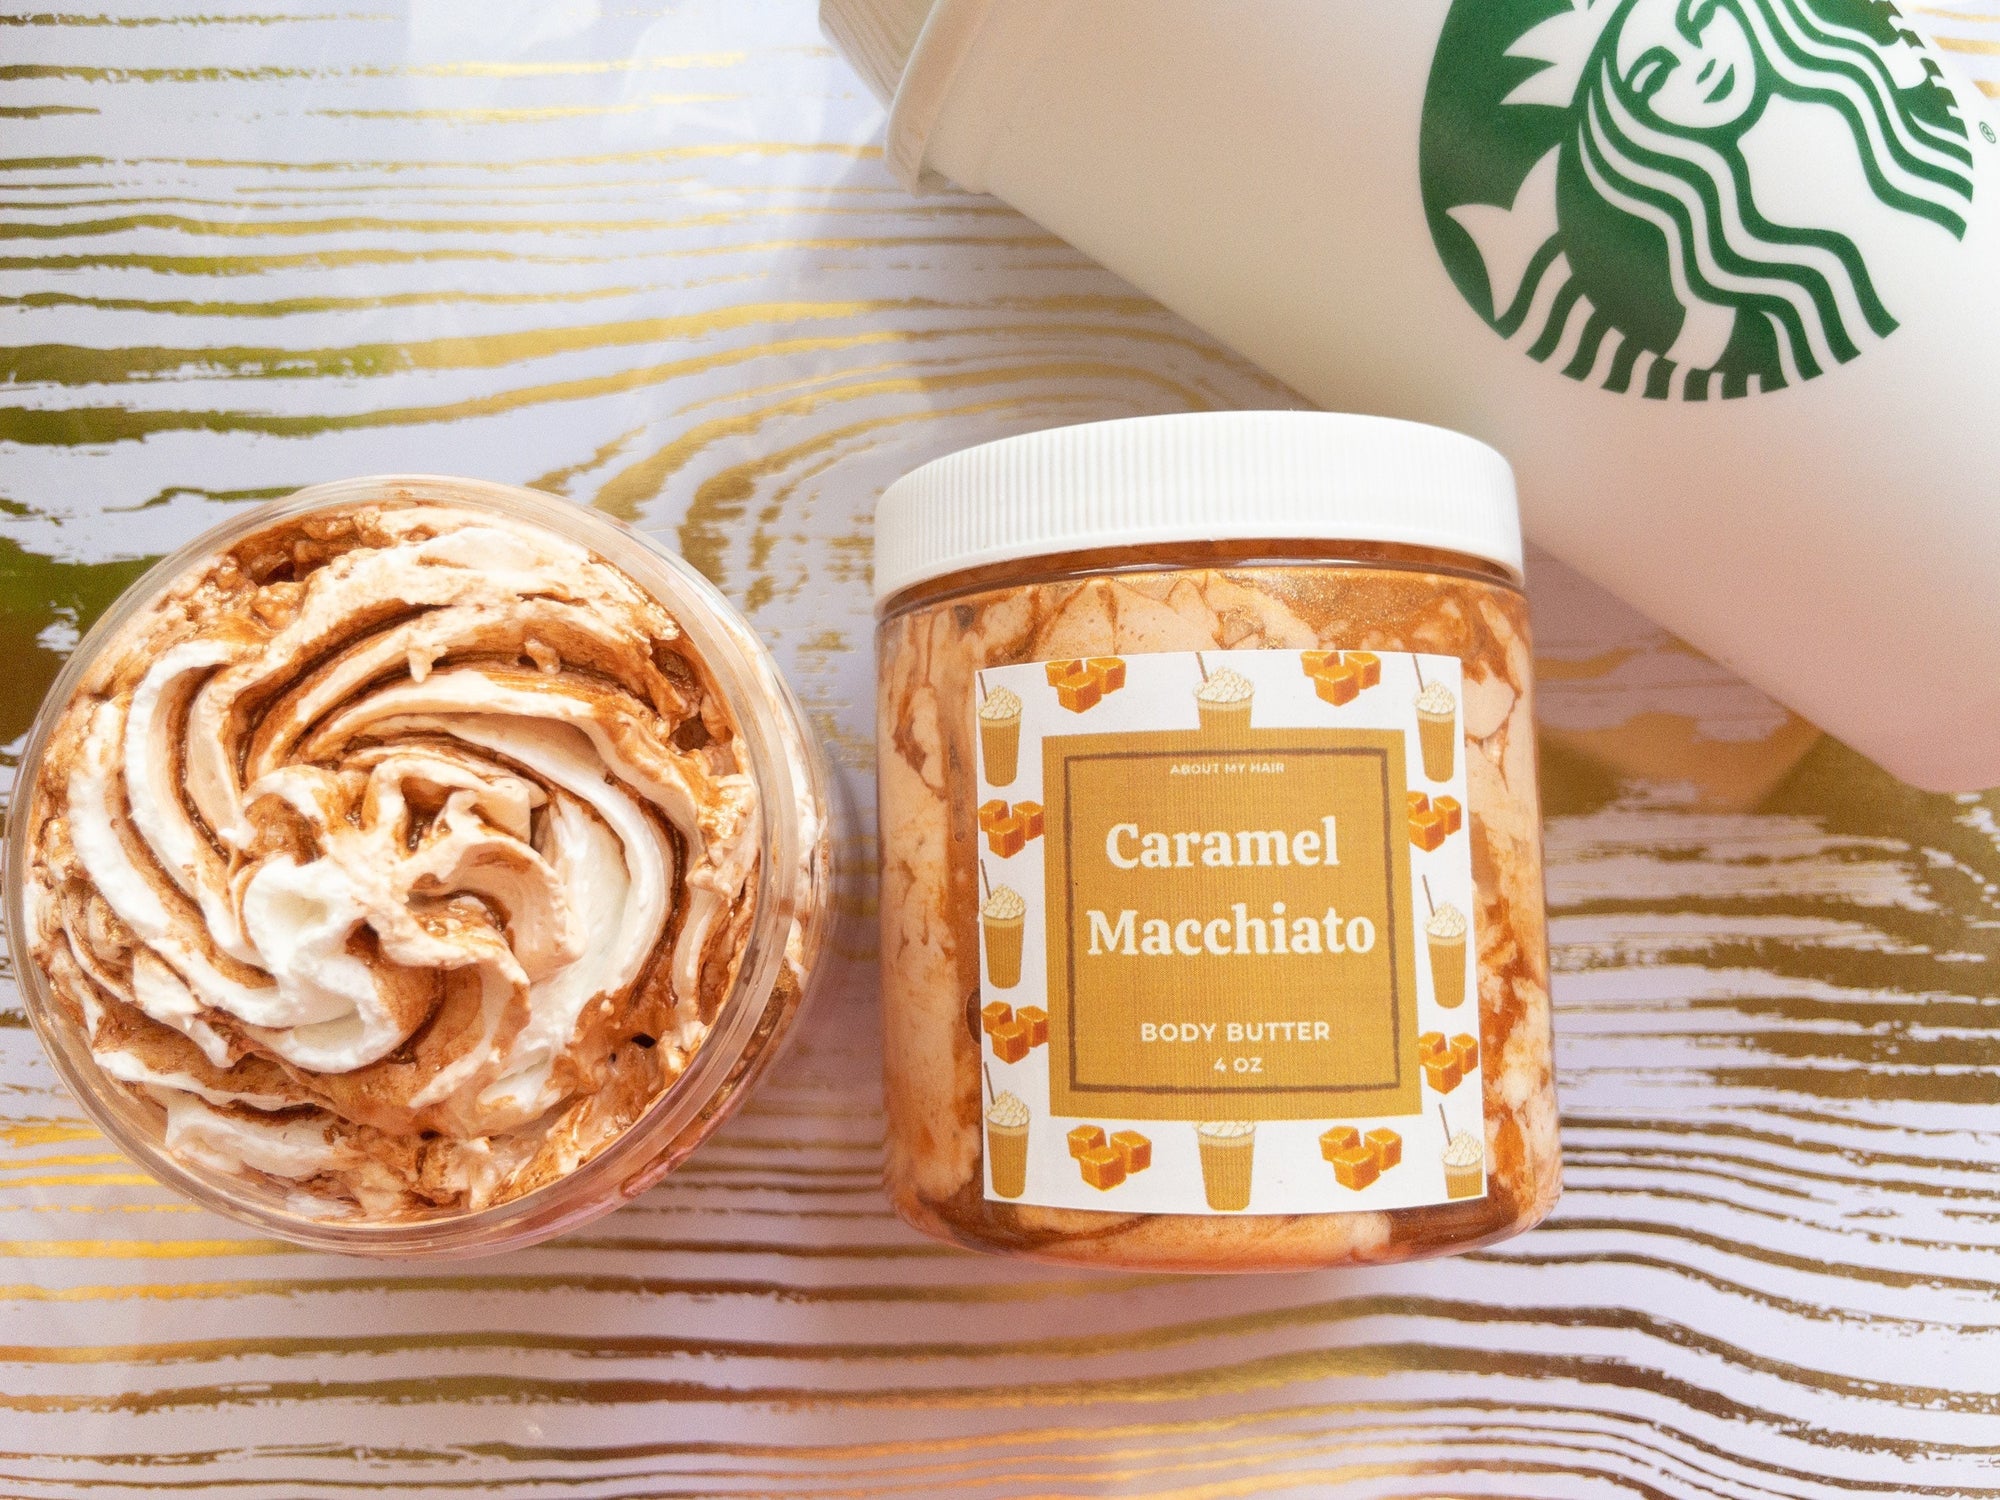 Caramel Macchiato Scented Body Butter | About My Hair Care